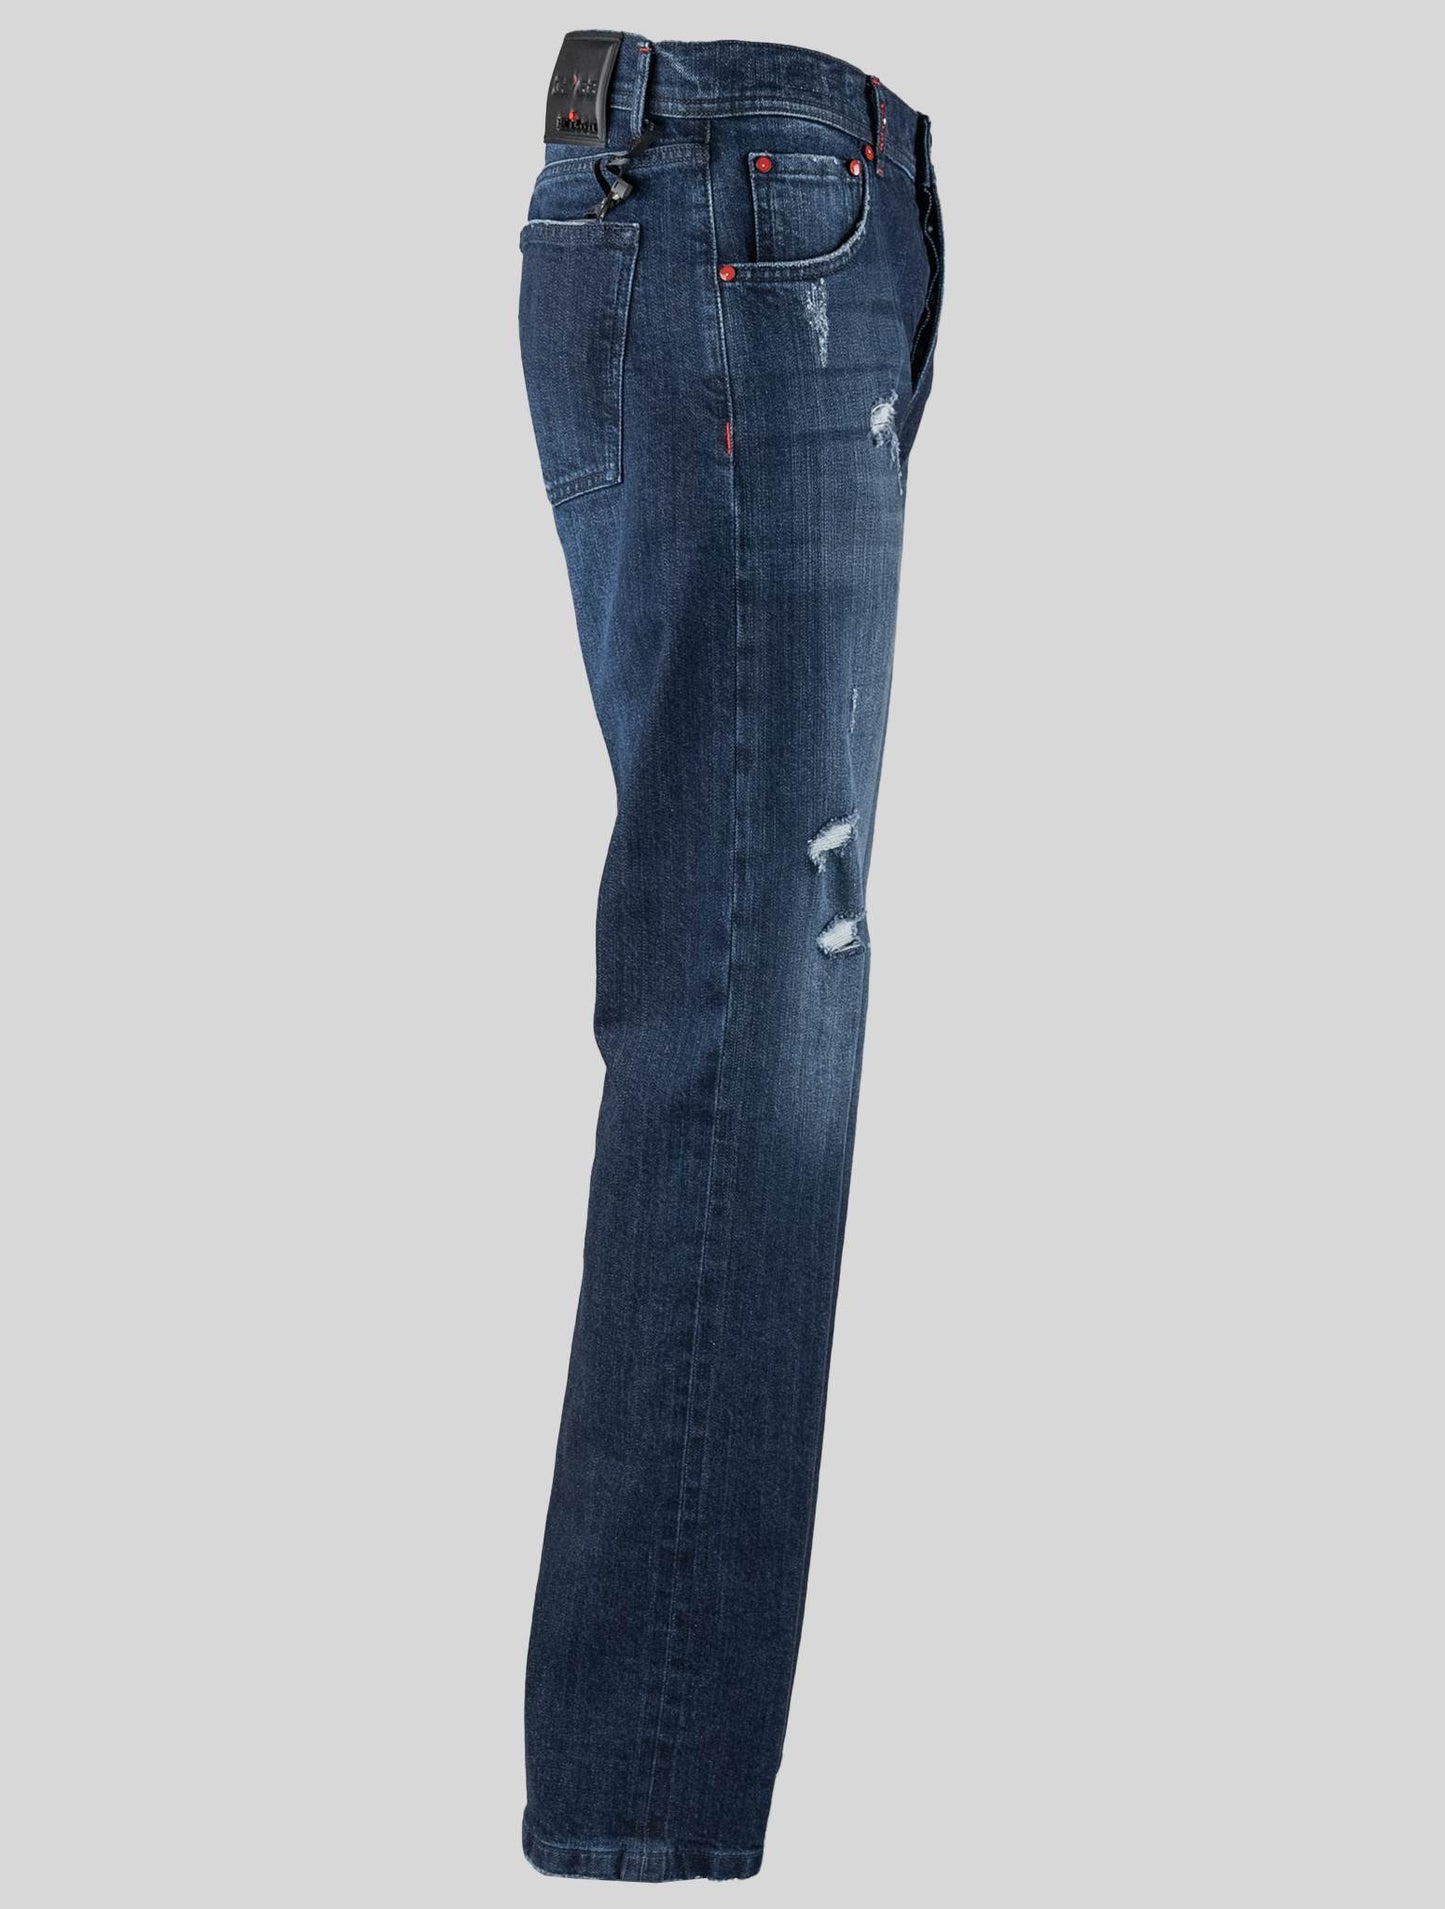 Kiton Blue Cotton Ea Jeans Limited Edition 04 of 22